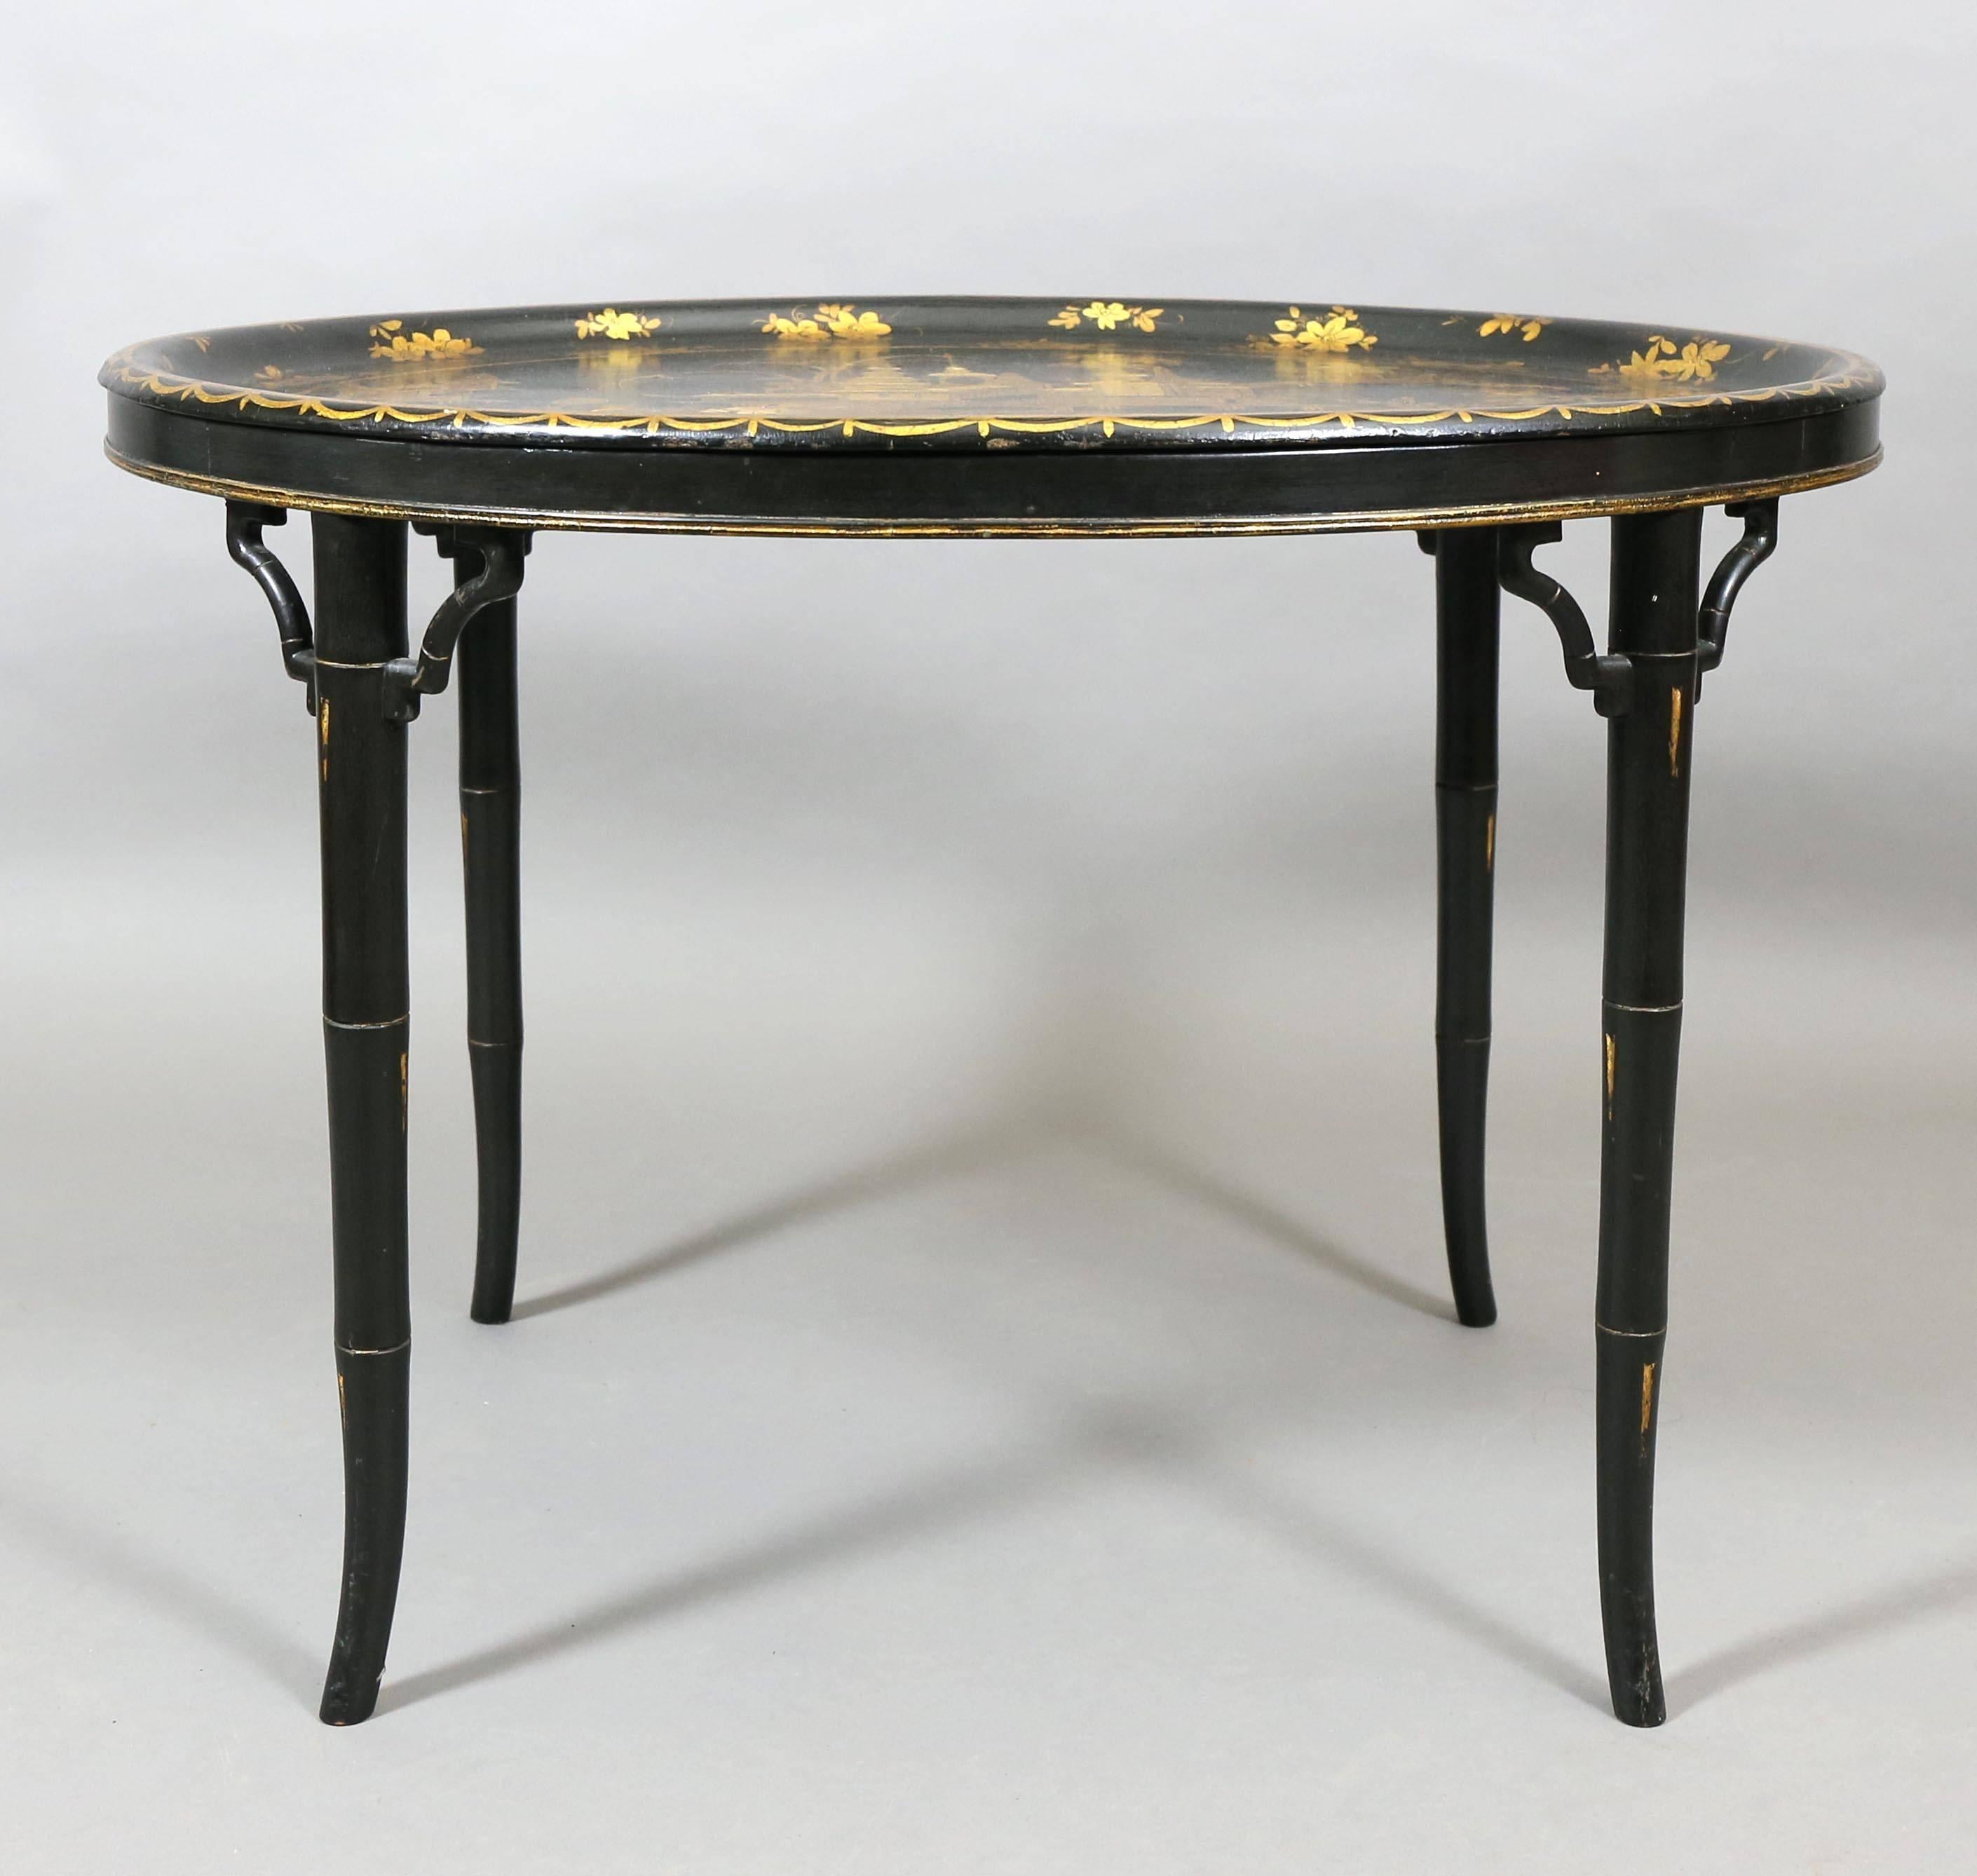 Oval top with gilded oriental scenes, the conforming base with bamboo turned legs.